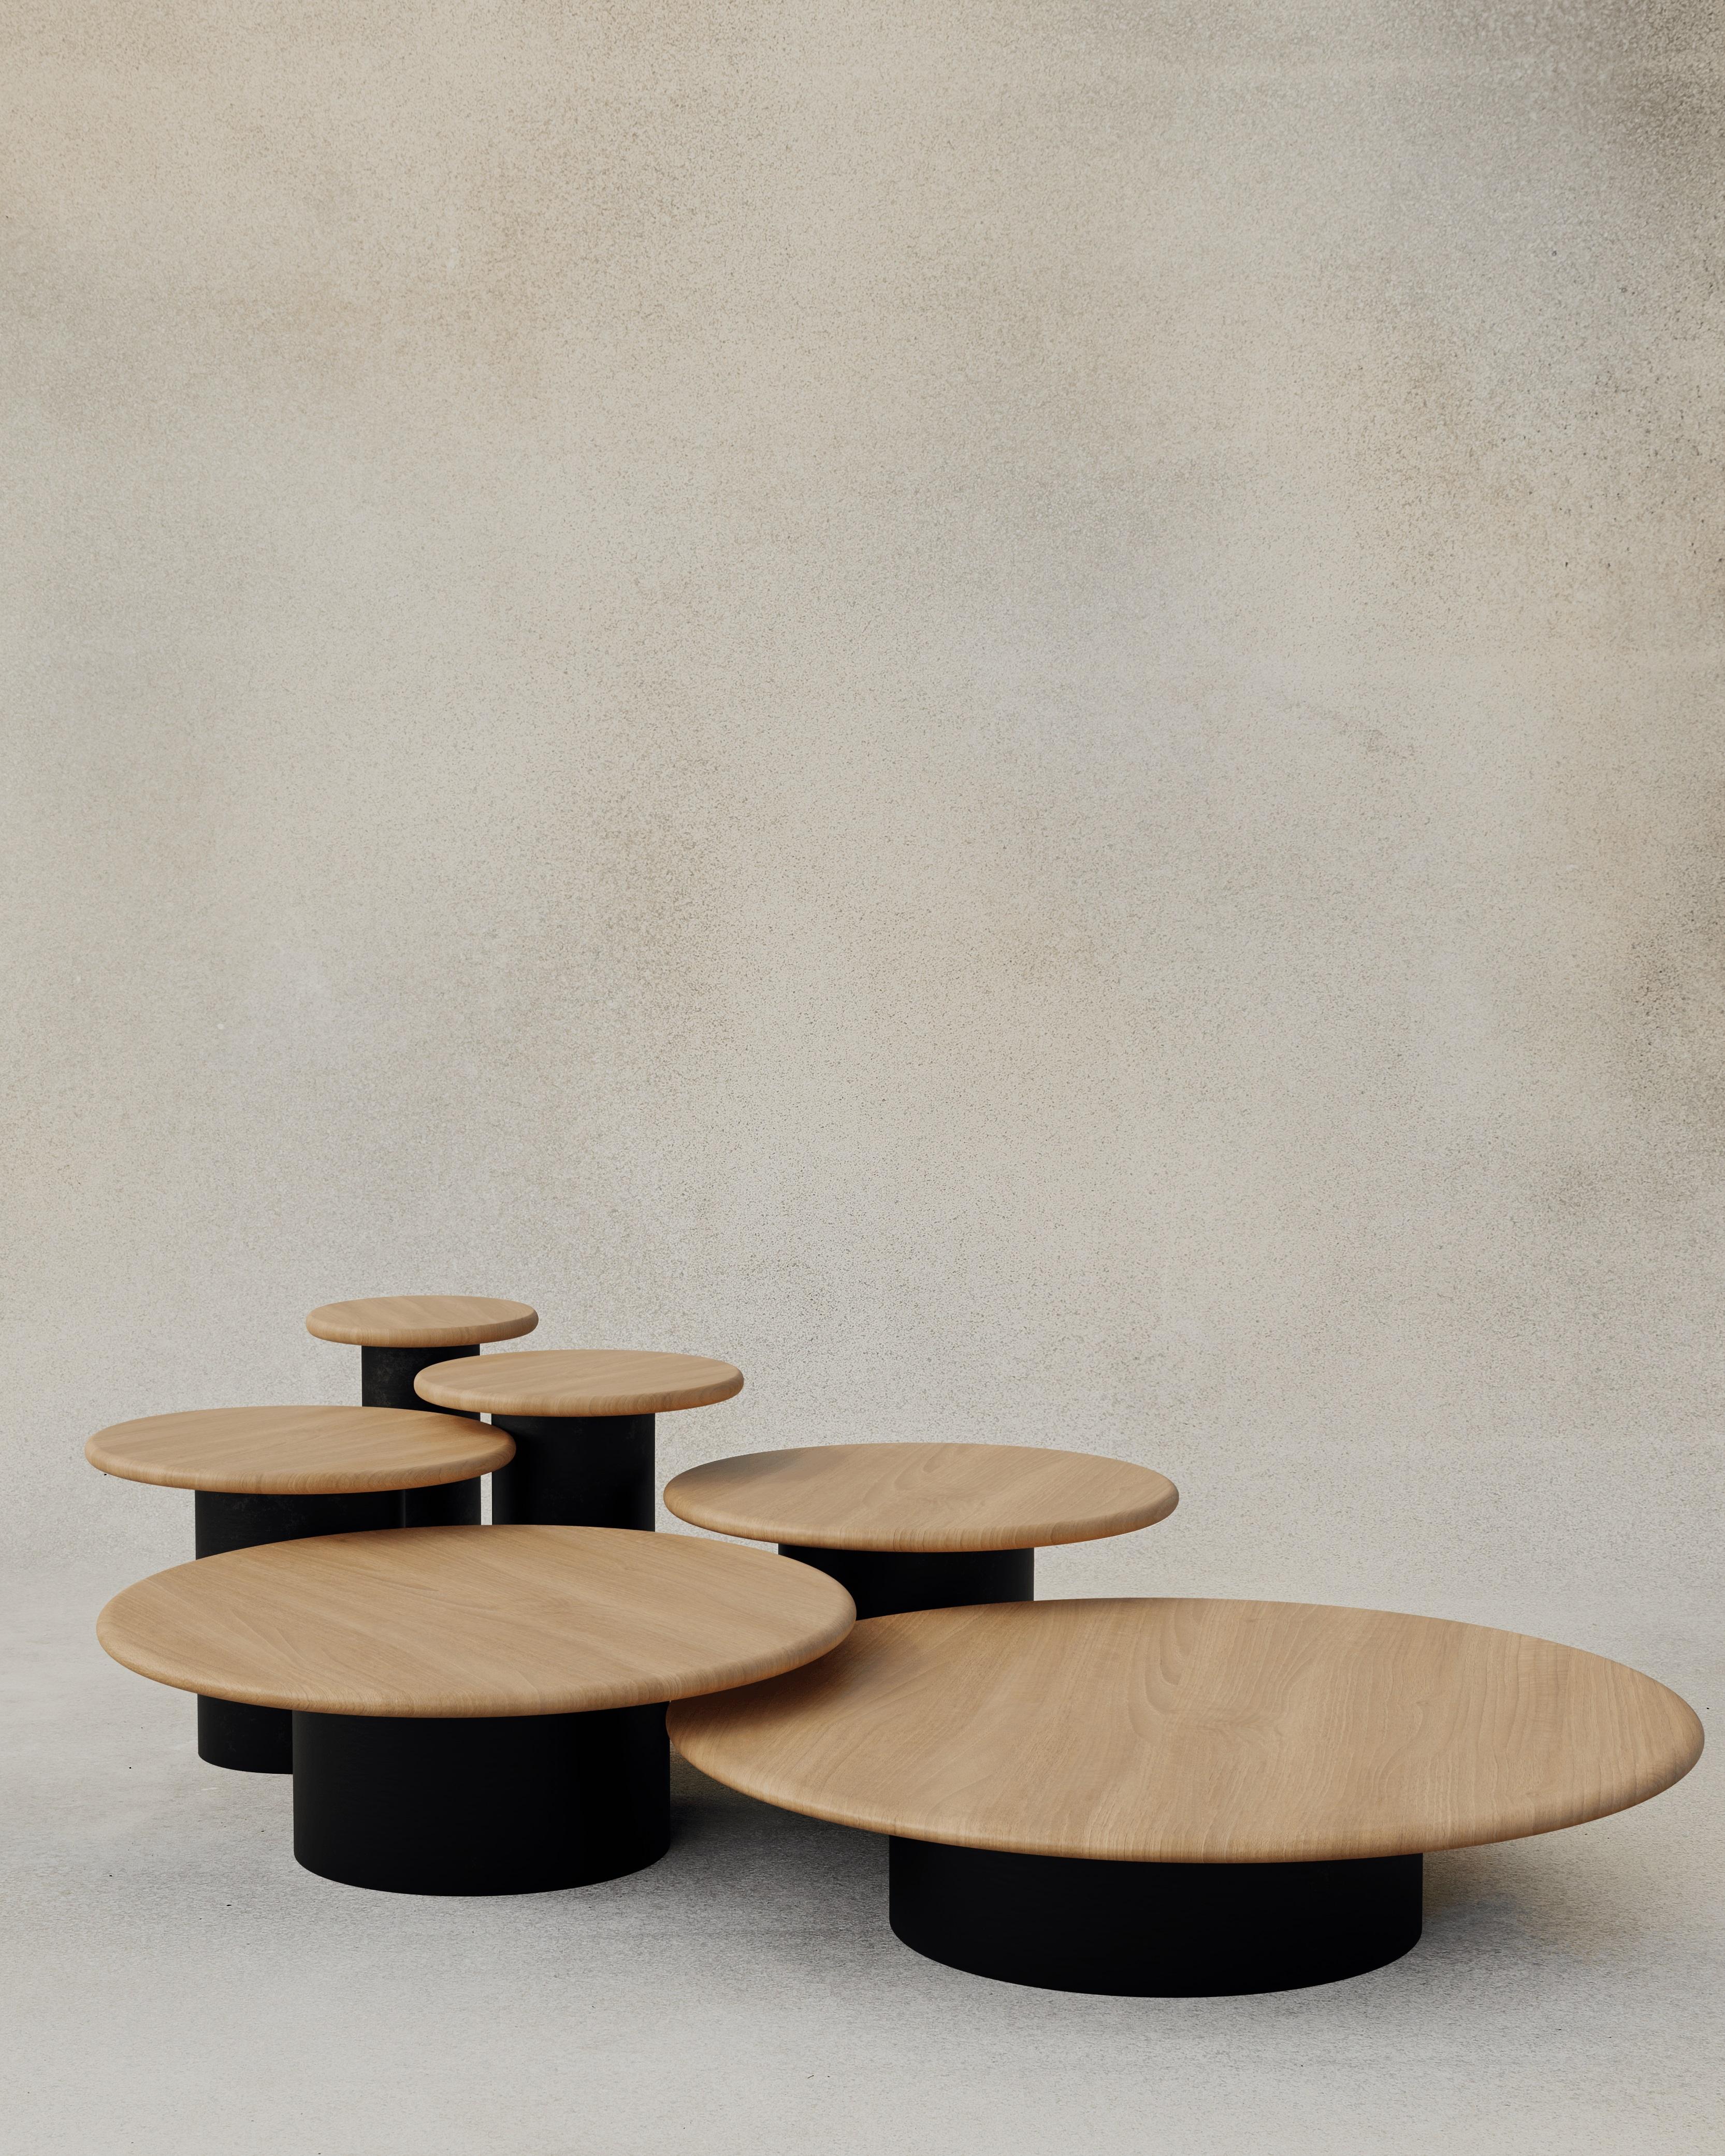 With their circular profiles, varying proportions and potential to be nested, these versatile tables evoke the pattern of raindrops in a pool of water when placed together.

Bought as a full set of 300, 400, 500, 600, 800 and 1000, we add a 10%